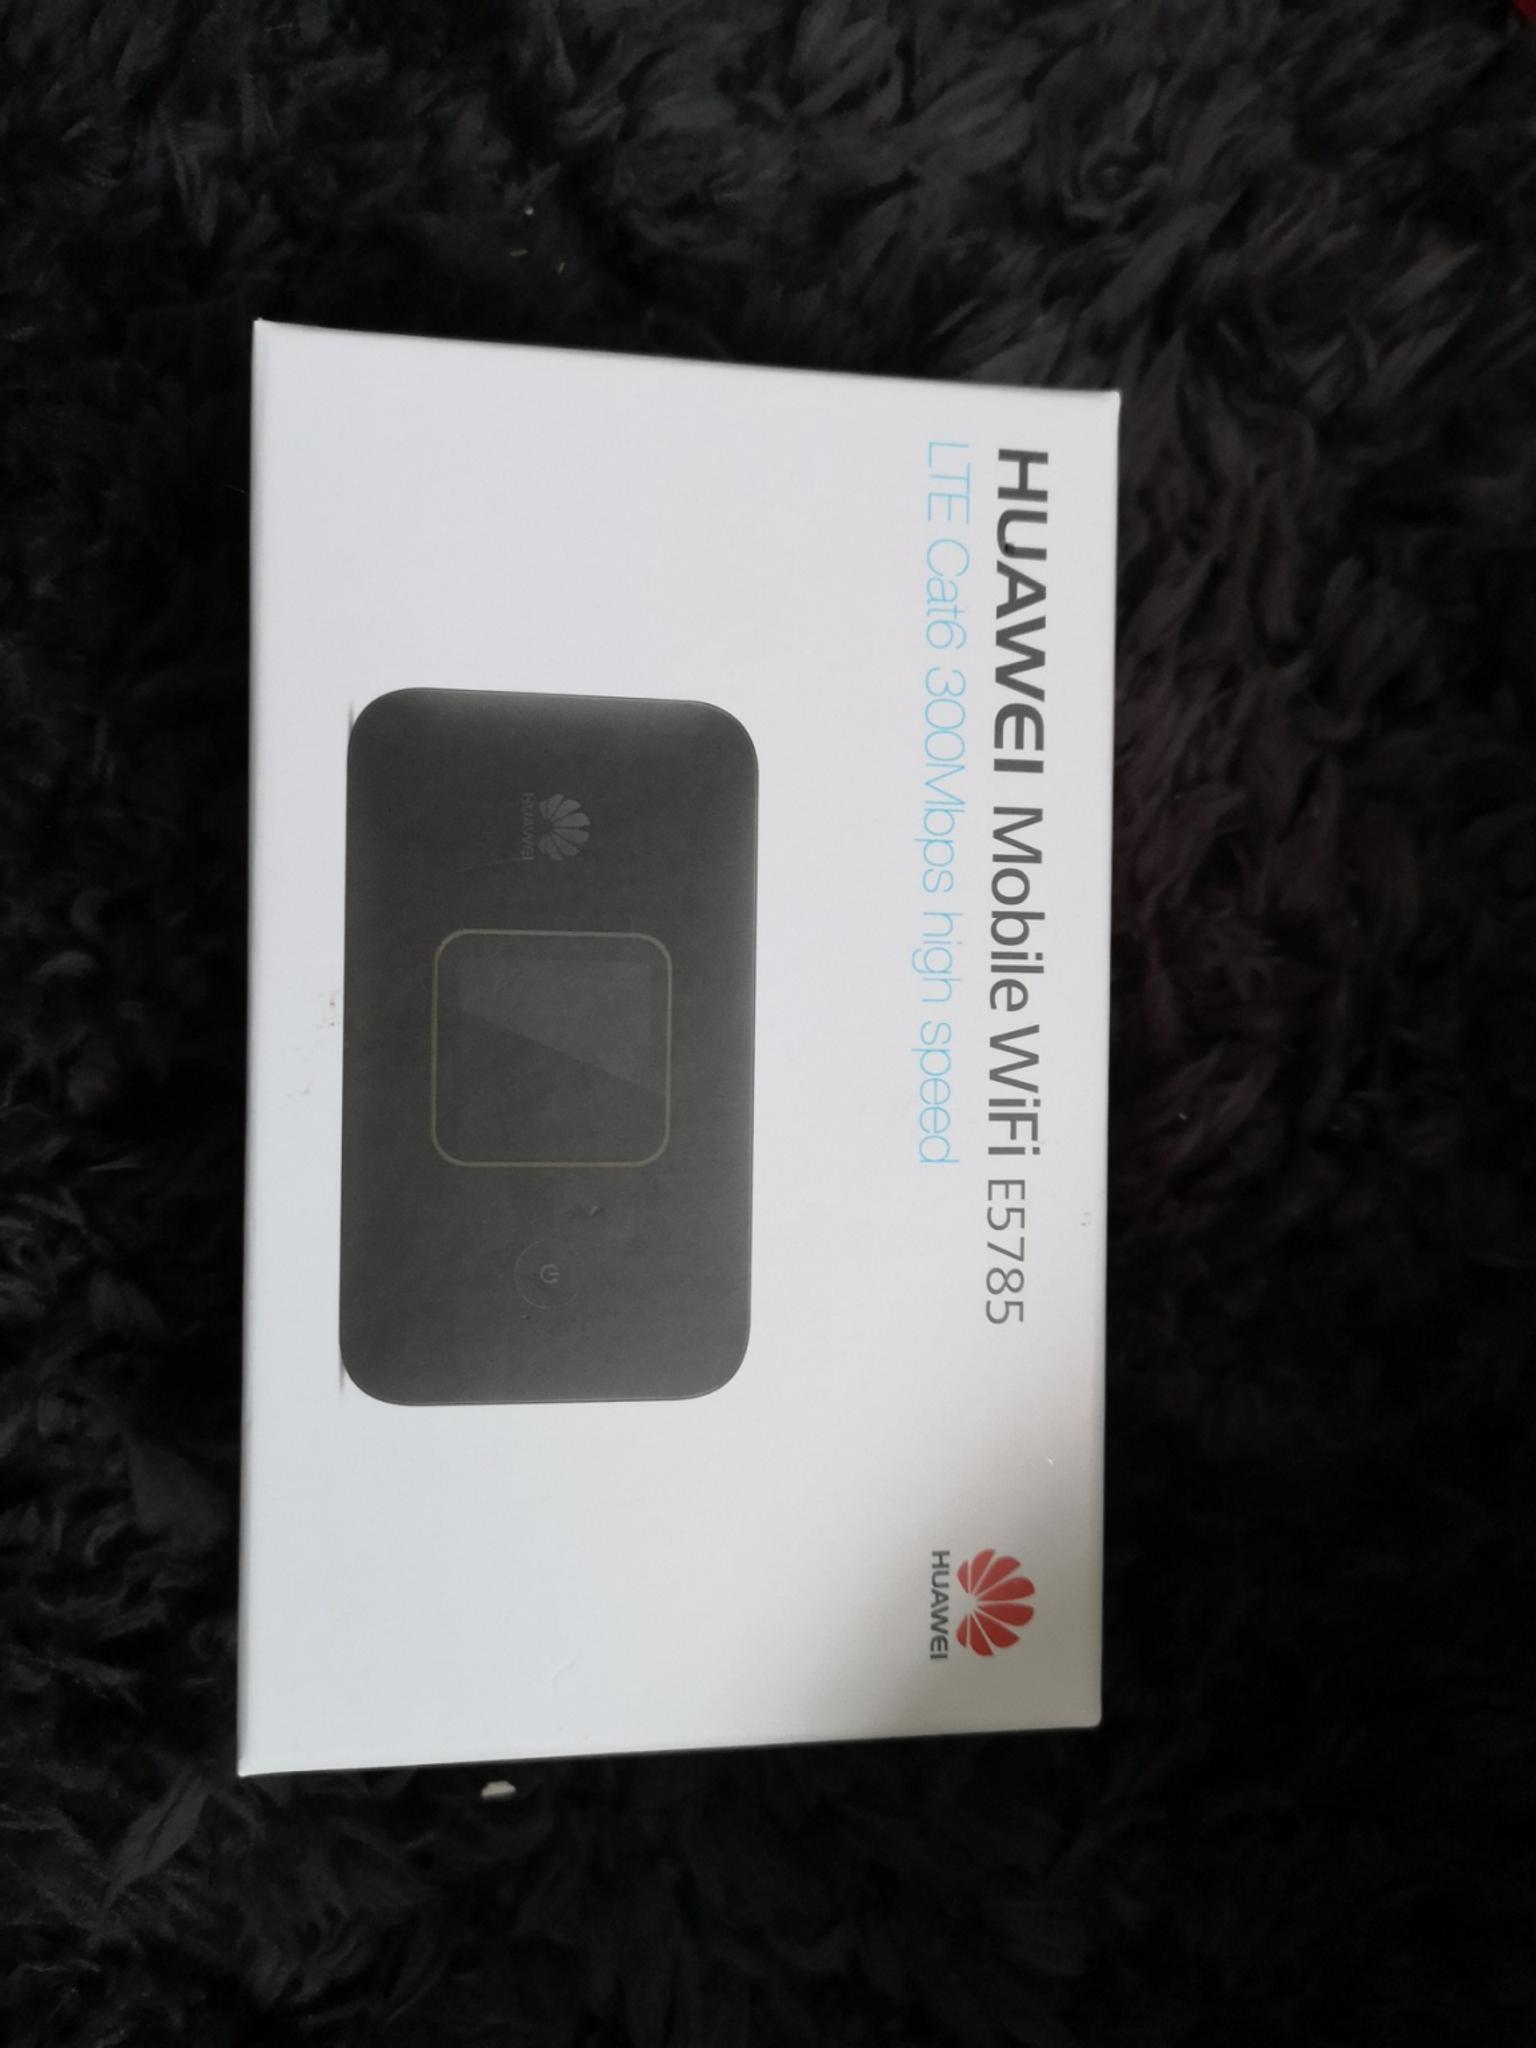 Huawei Mobile Wifi E5785 In Nn17 Corby For 60 00 For Sale Shpock